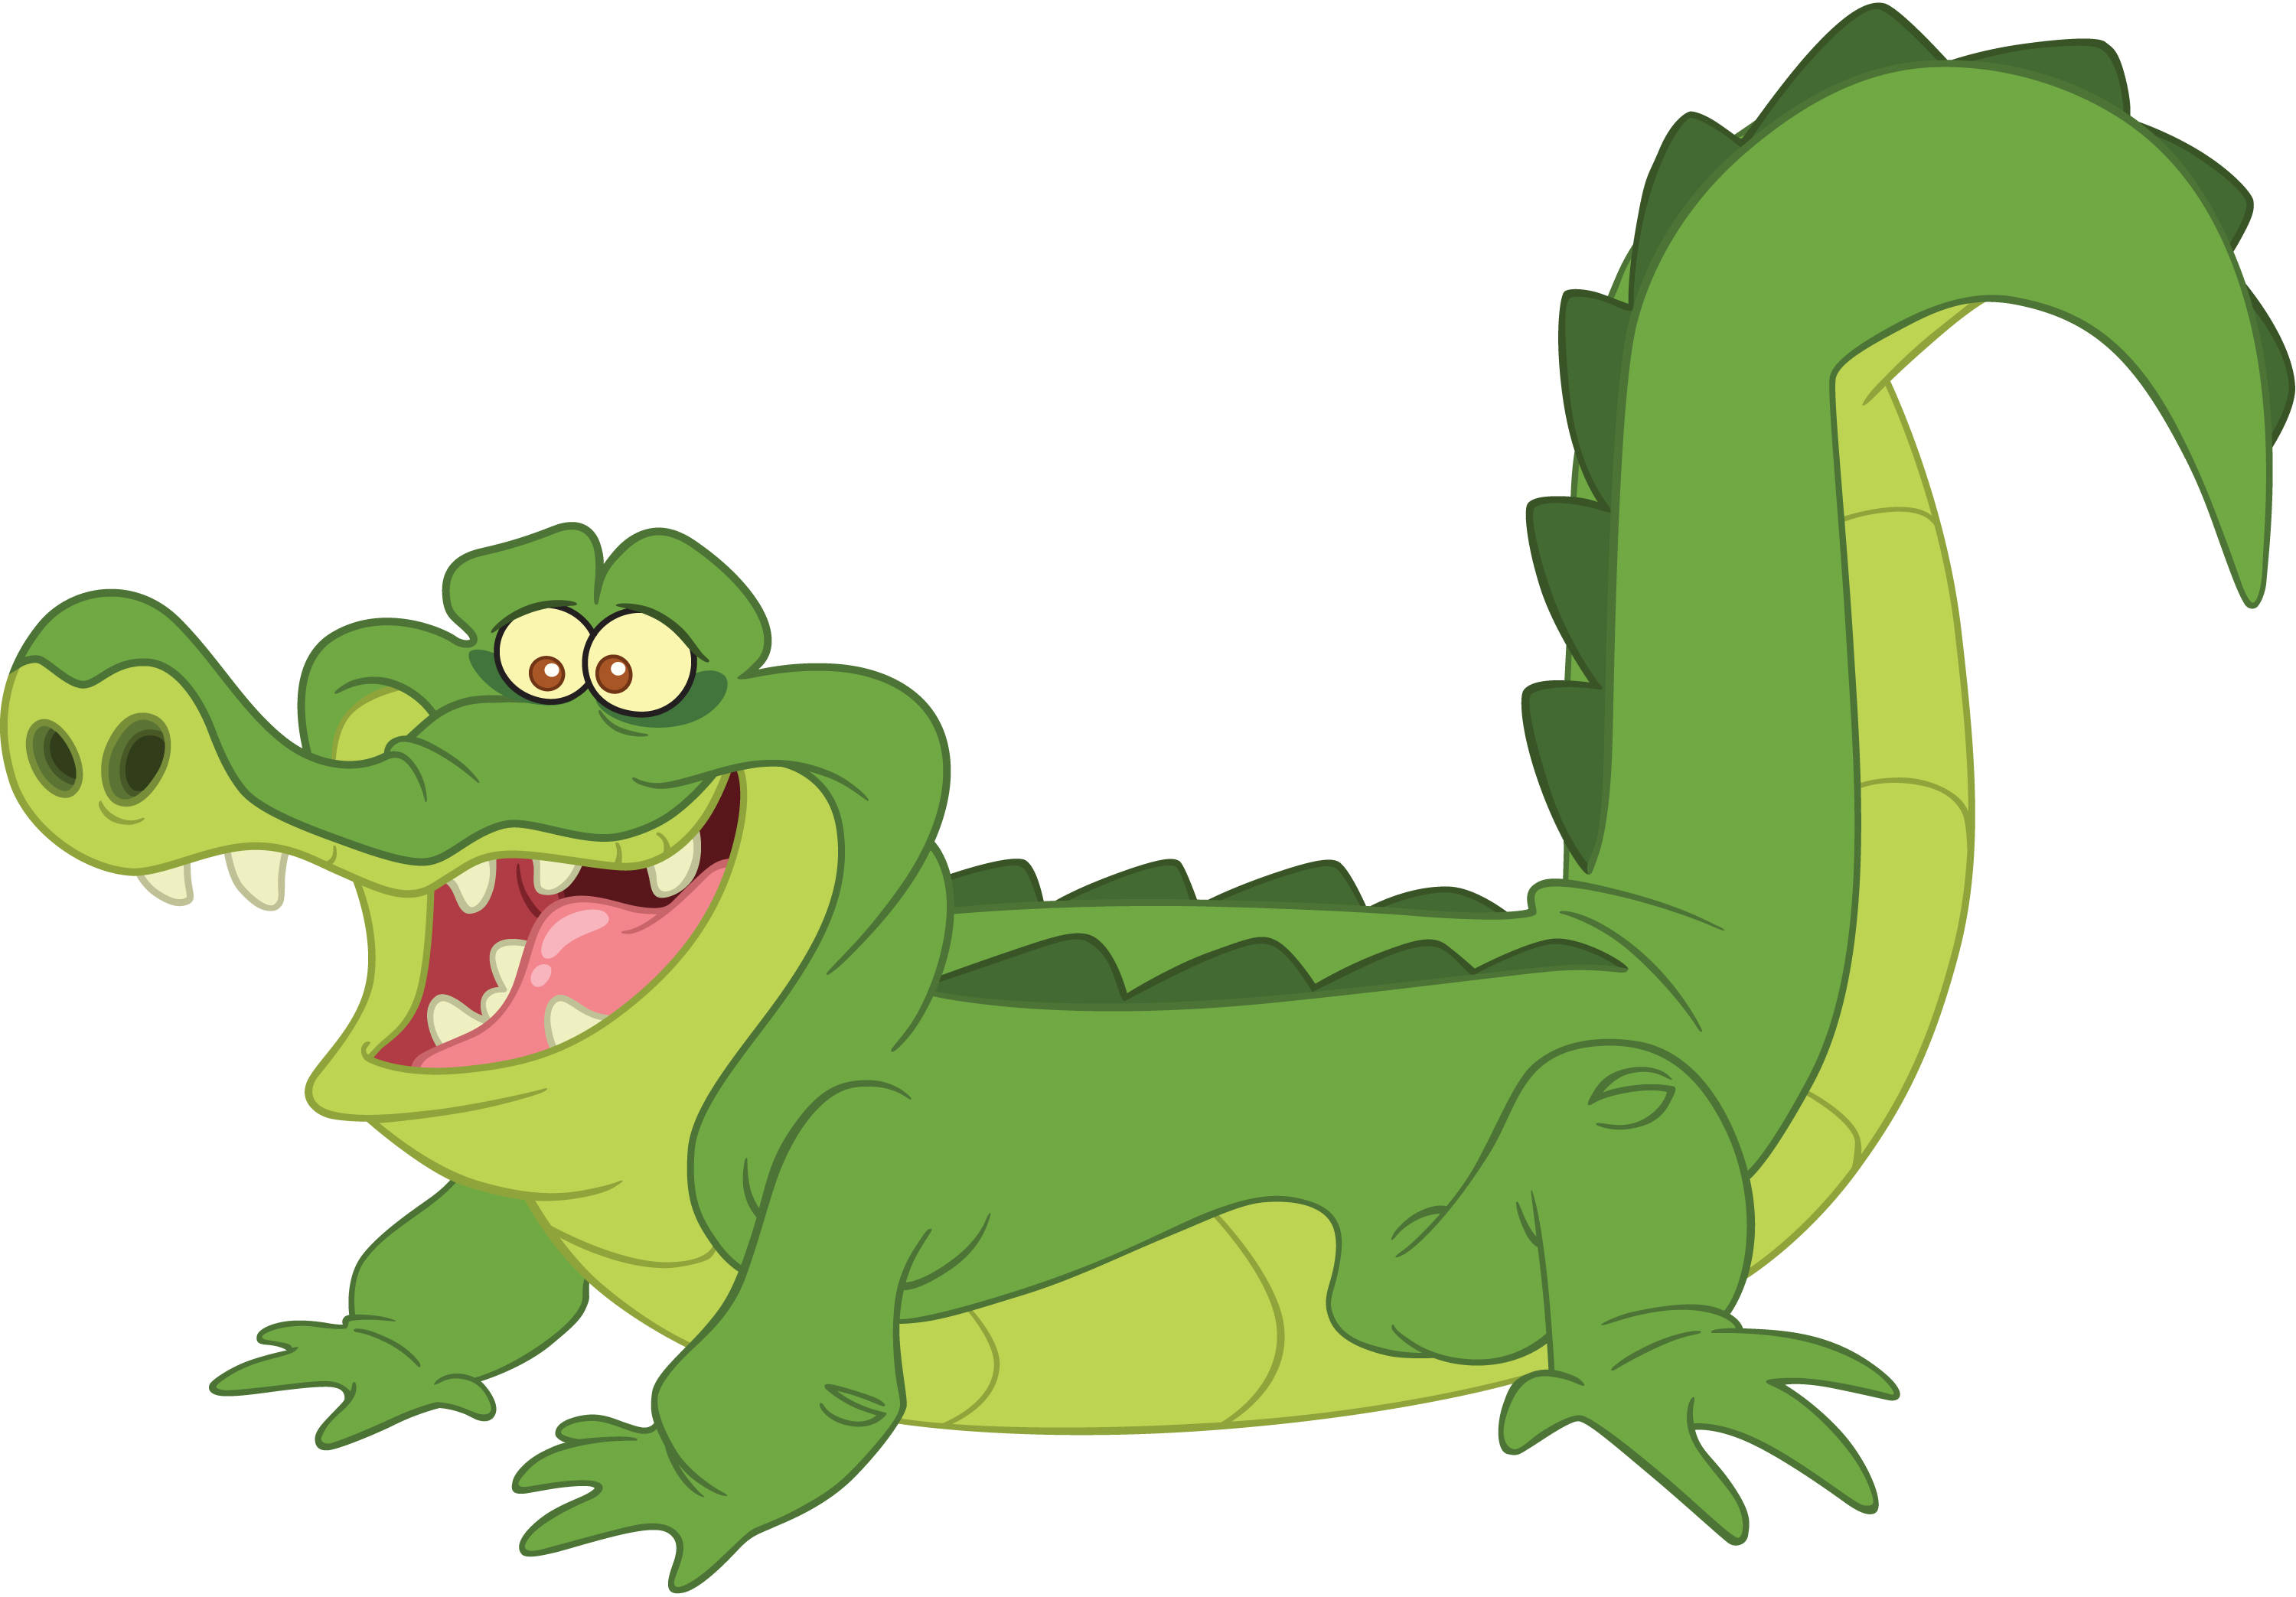 Tick Tock The Crocodile As He Appears In Jake And The Never Land